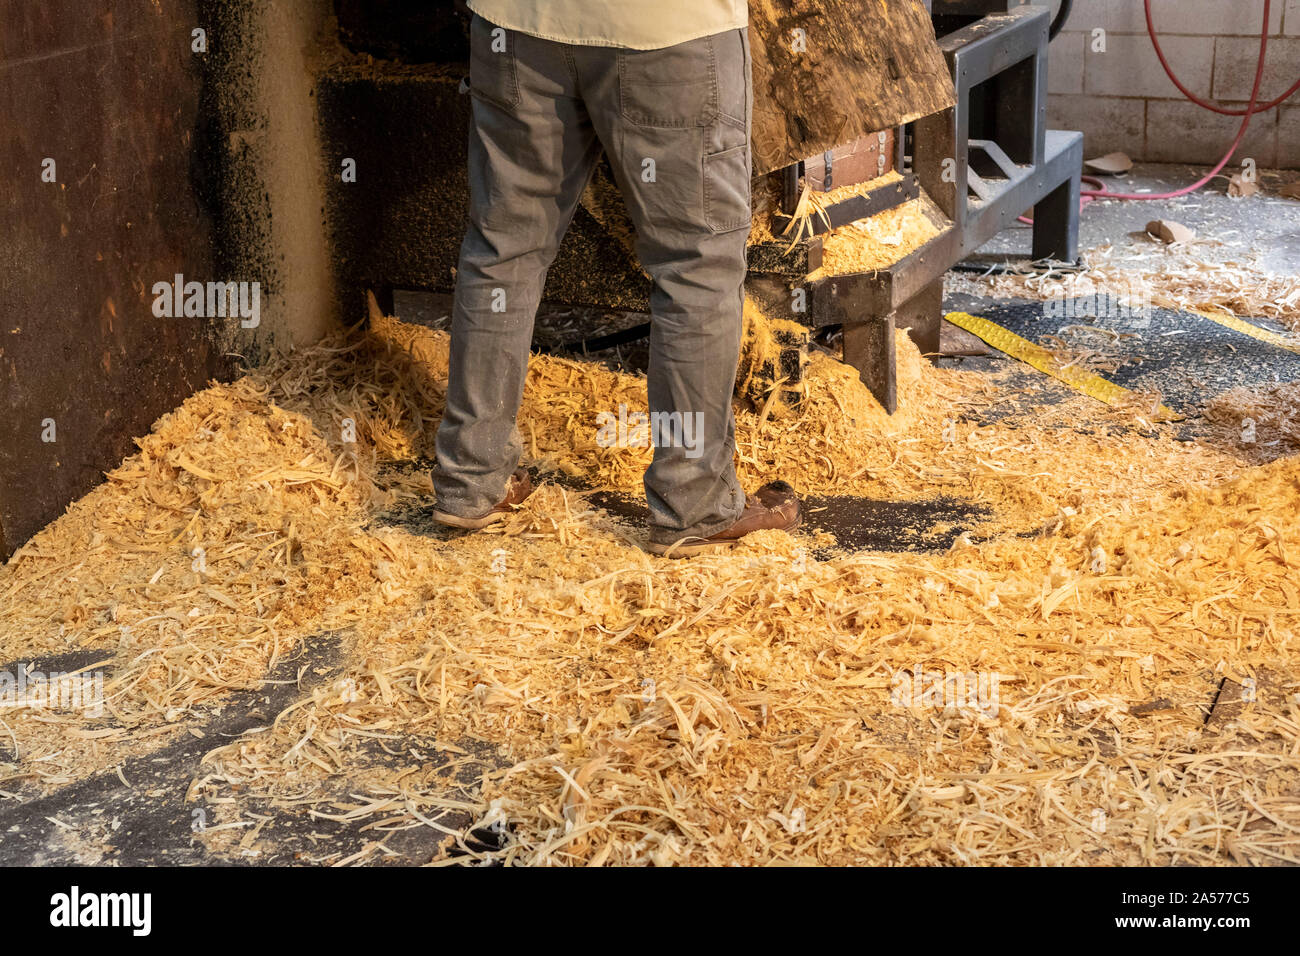 Holland, Michigan - A worker stands in wood shavings as he uses a lathe to shape wood bowls from a block of wood at the Holland Bowl Mill. Stock Photo